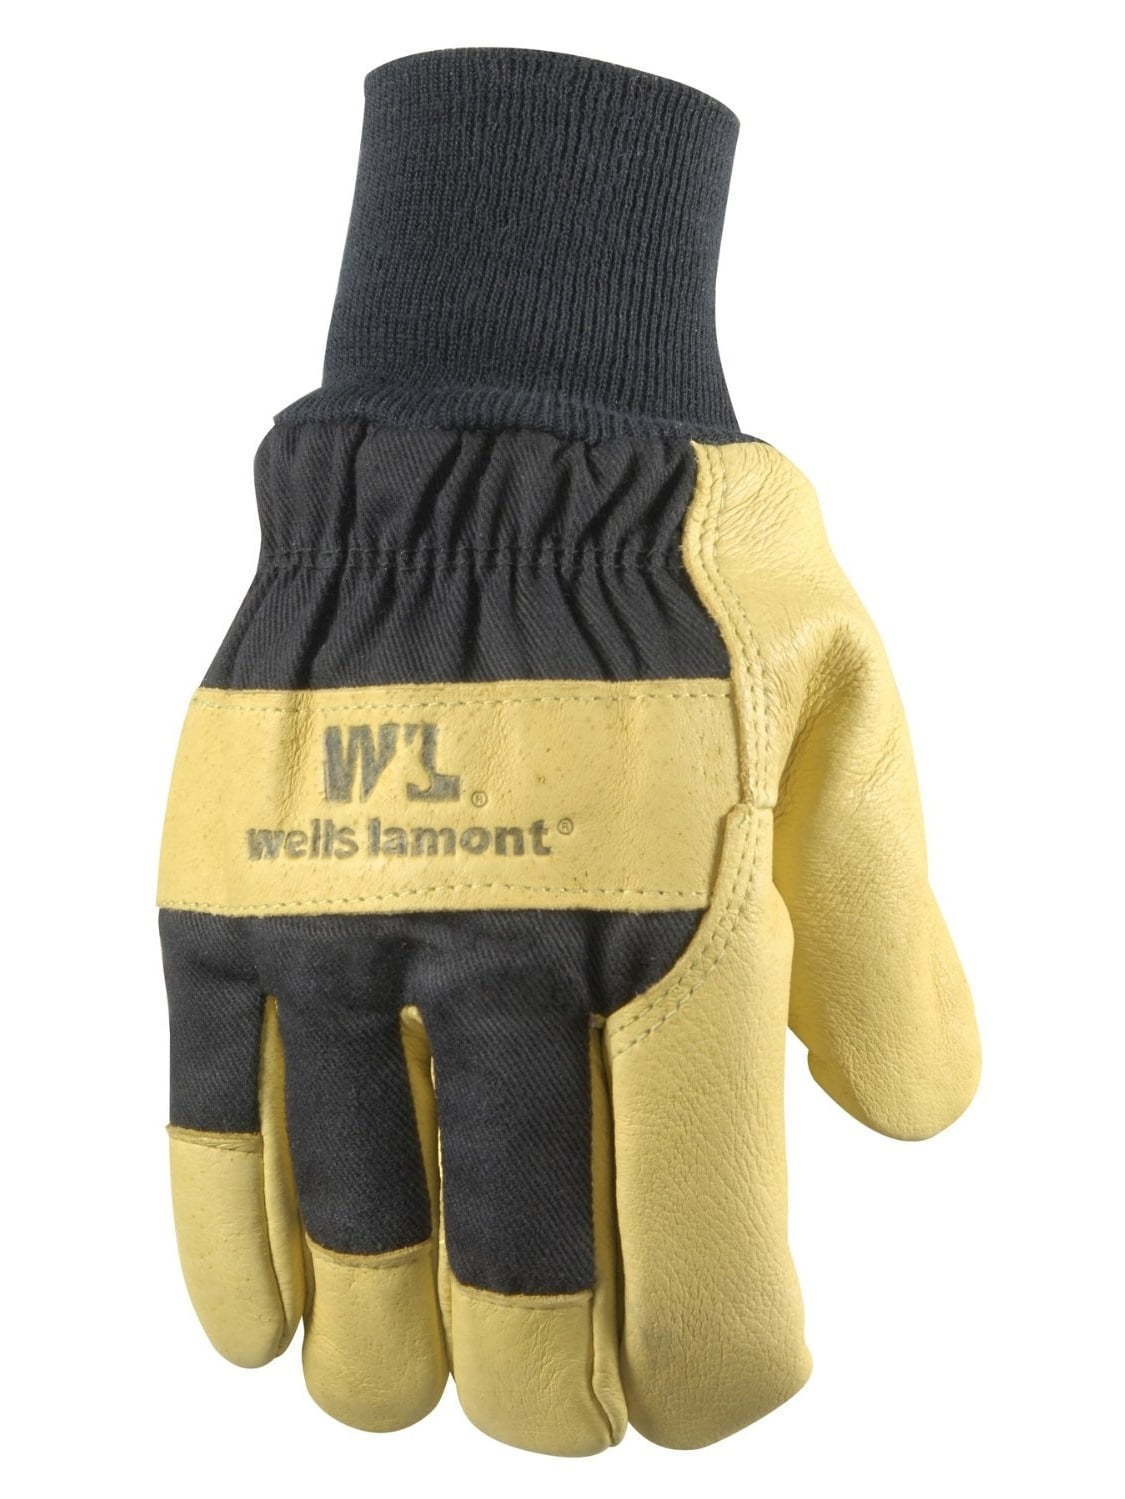 Super-Fit™ Grey Knit Thermal Work Gloves with Natural Rubber Coated Palm -  Large